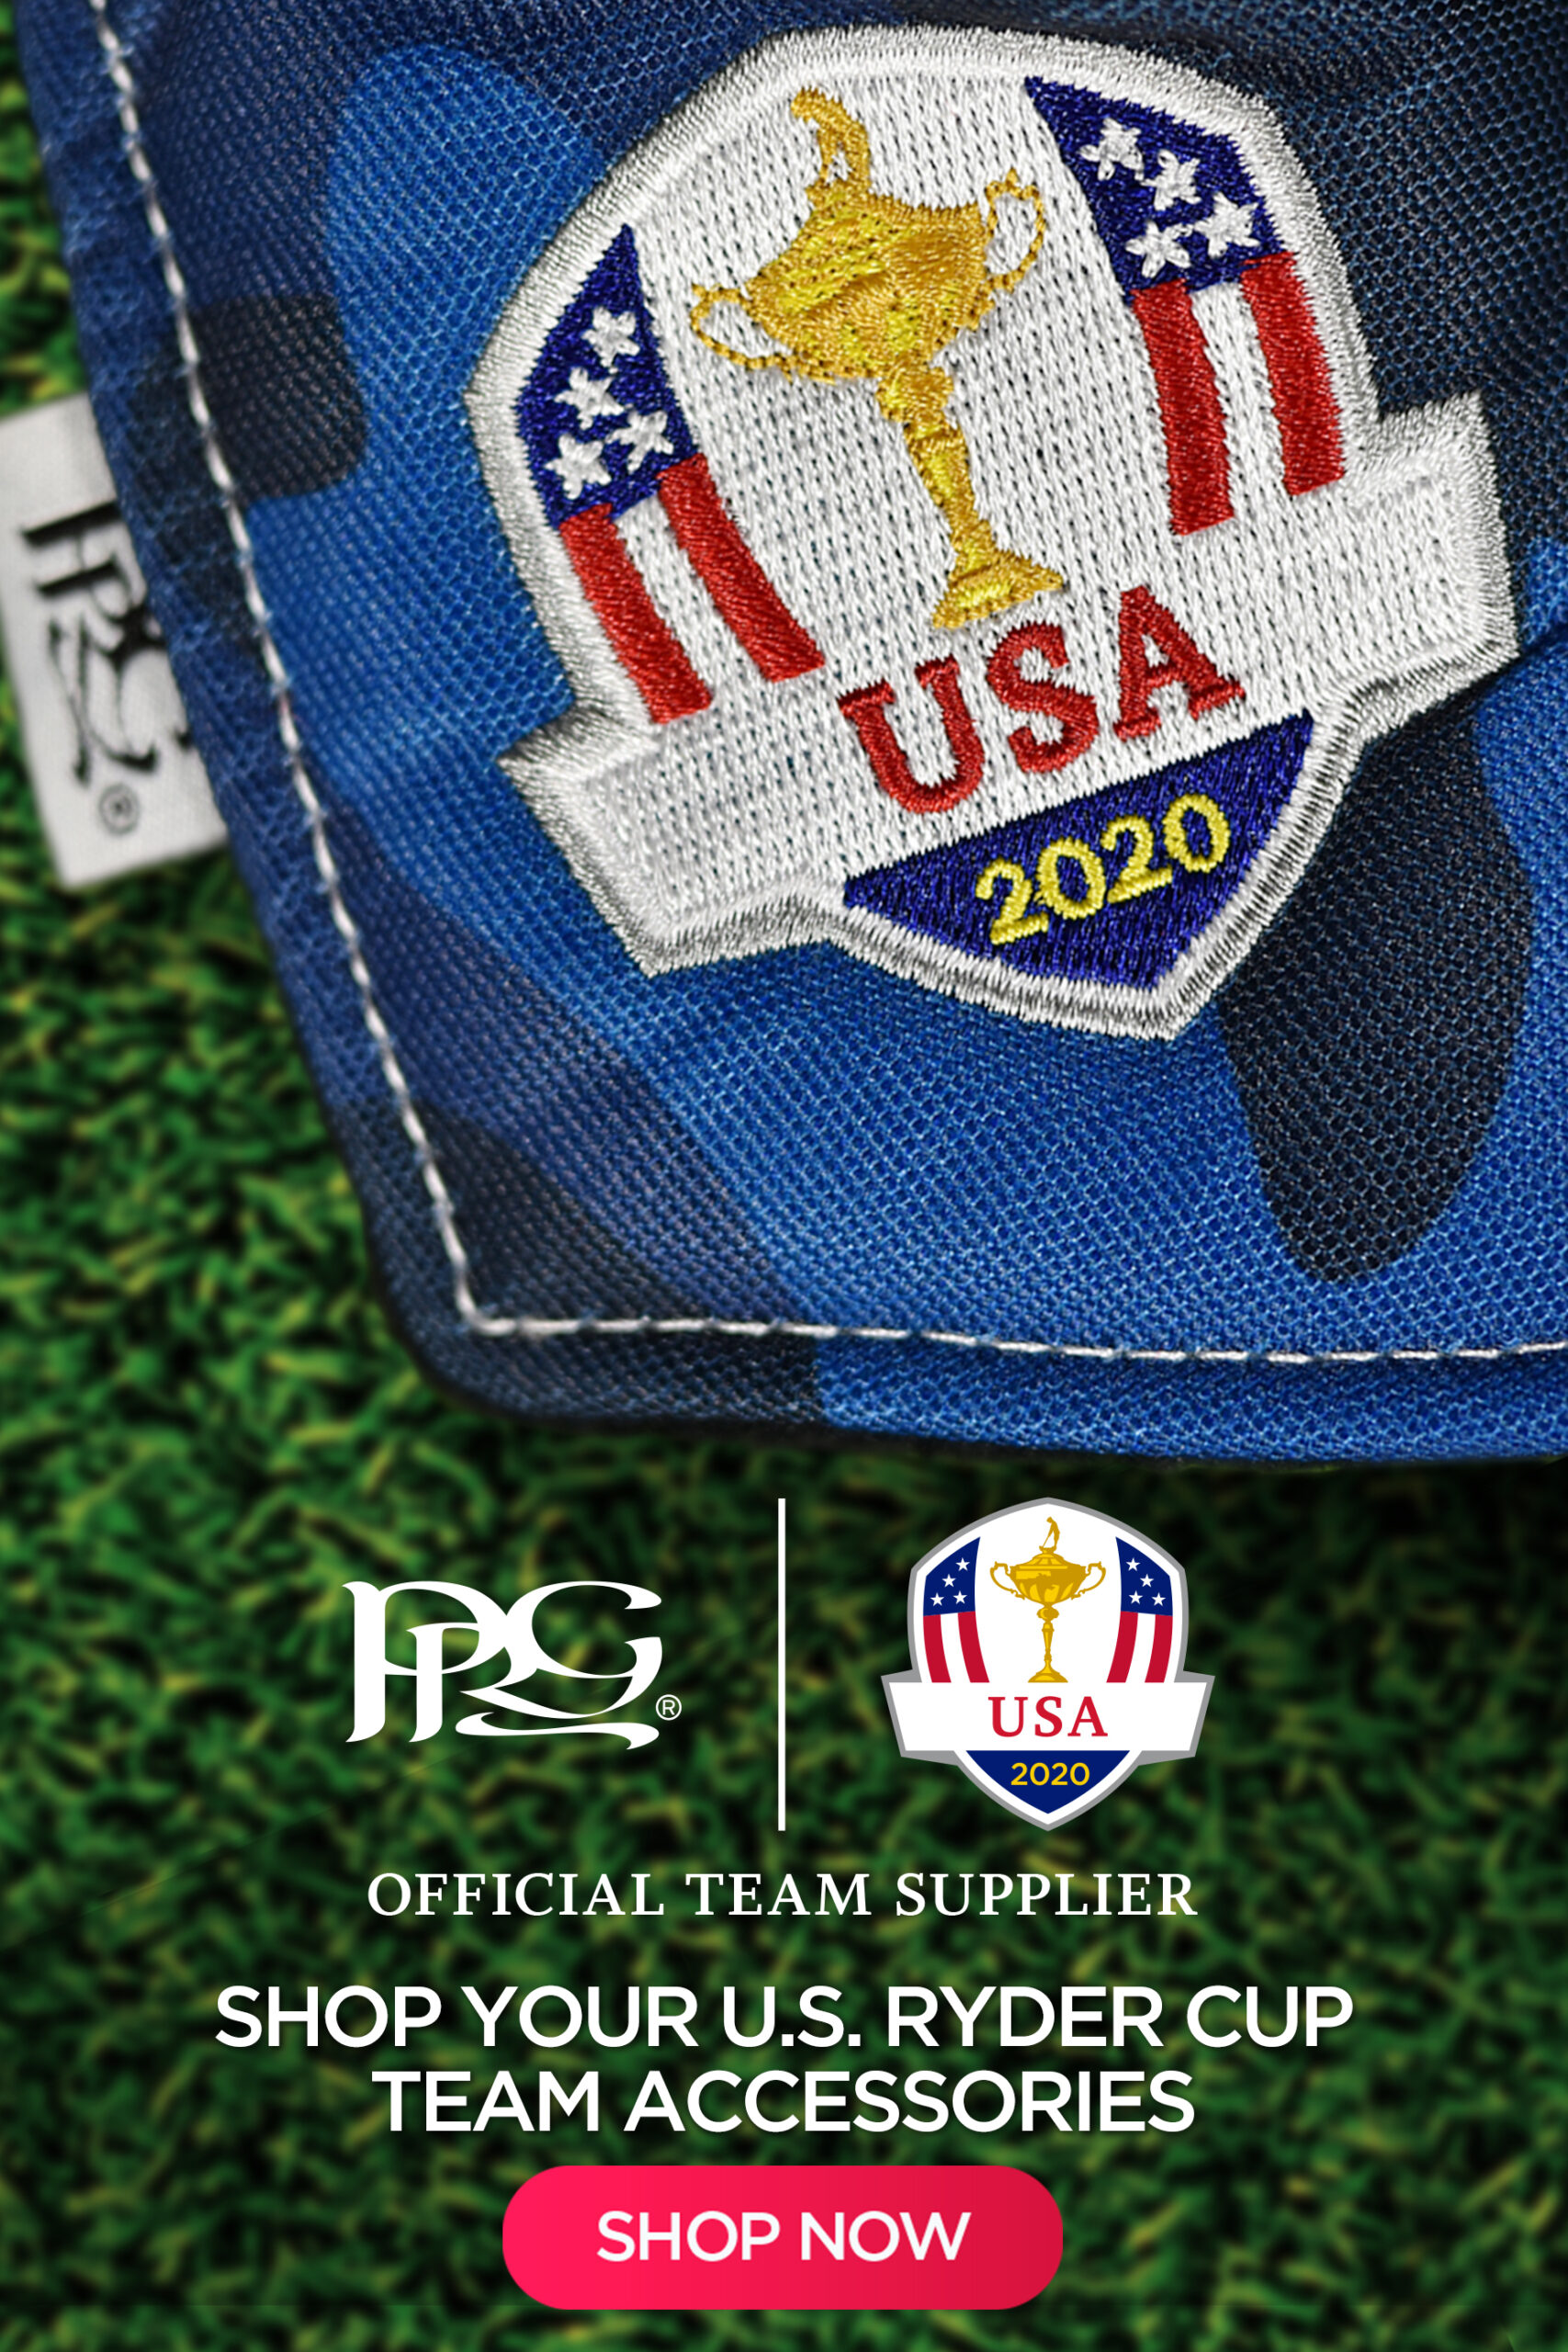 https://prg-golf.com/product-category/shop/2020-u-s-ryder-cup-team-official-accessories/